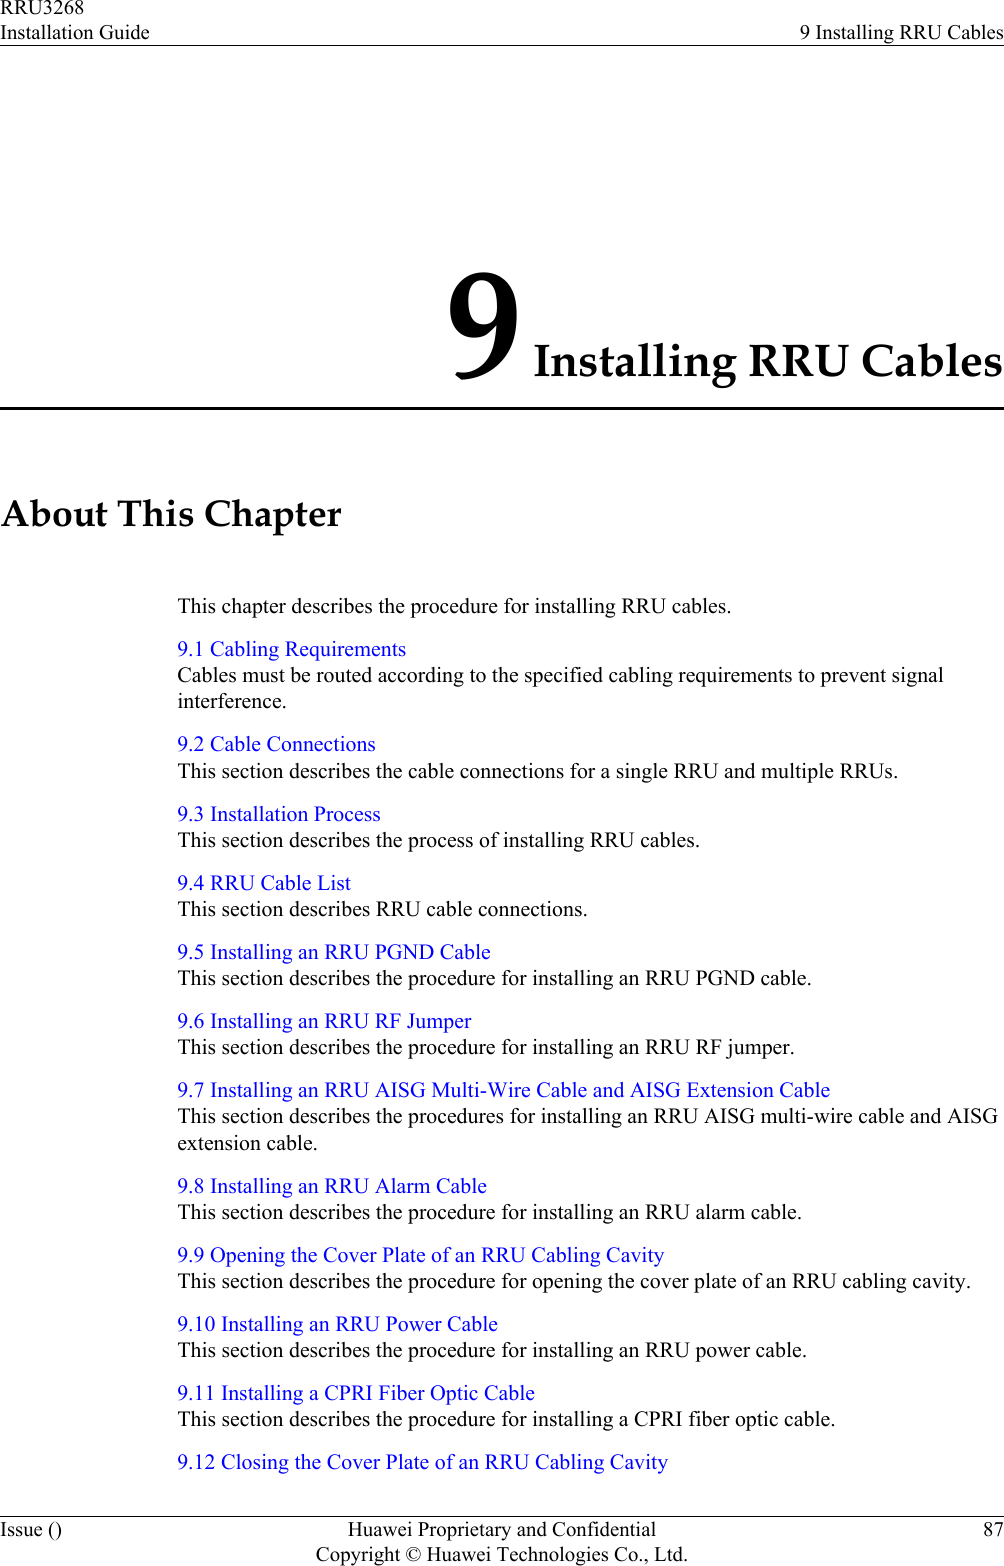 9 Installing RRU CablesAbout This ChapterThis chapter describes the procedure for installing RRU cables.9.1 Cabling RequirementsCables must be routed according to the specified cabling requirements to prevent signalinterference.9.2 Cable ConnectionsThis section describes the cable connections for a single RRU and multiple RRUs.9.3 Installation ProcessThis section describes the process of installing RRU cables.9.4 RRU Cable ListThis section describes RRU cable connections.9.5 Installing an RRU PGND CableThis section describes the procedure for installing an RRU PGND cable.9.6 Installing an RRU RF JumperThis section describes the procedure for installing an RRU RF jumper.9.7 Installing an RRU AISG Multi-Wire Cable and AISG Extension CableThis section describes the procedures for installing an RRU AISG multi-wire cable and AISGextension cable.9.8 Installing an RRU Alarm CableThis section describes the procedure for installing an RRU alarm cable.9.9 Opening the Cover Plate of an RRU Cabling CavityThis section describes the procedure for opening the cover plate of an RRU cabling cavity.9.10 Installing an RRU Power CableThis section describes the procedure for installing an RRU power cable.9.11 Installing a CPRI Fiber Optic CableThis section describes the procedure for installing a CPRI fiber optic cable.9.12 Closing the Cover Plate of an RRU Cabling CavityRRU3268Installation Guide 9 Installing RRU CablesIssue () Huawei Proprietary and ConfidentialCopyright © Huawei Technologies Co., Ltd.87